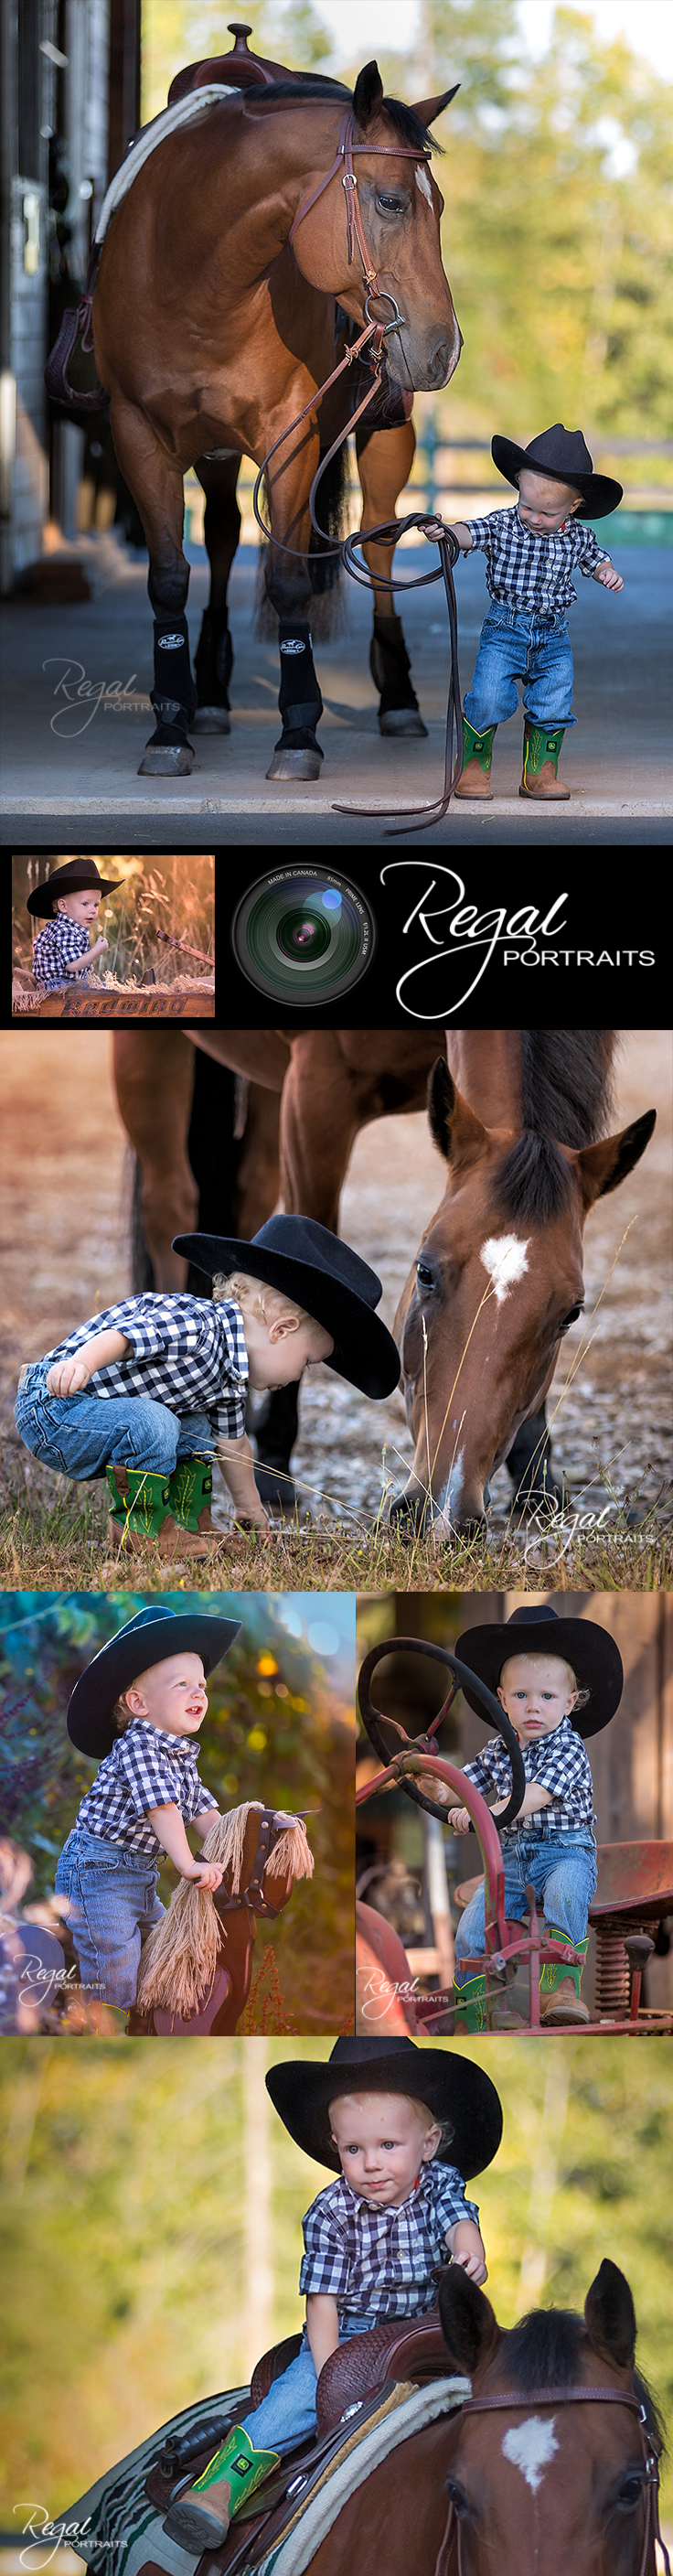 Super cute portrait of a little cowboy and his horse - Regal Portraits Photography in Victoria BC Canada